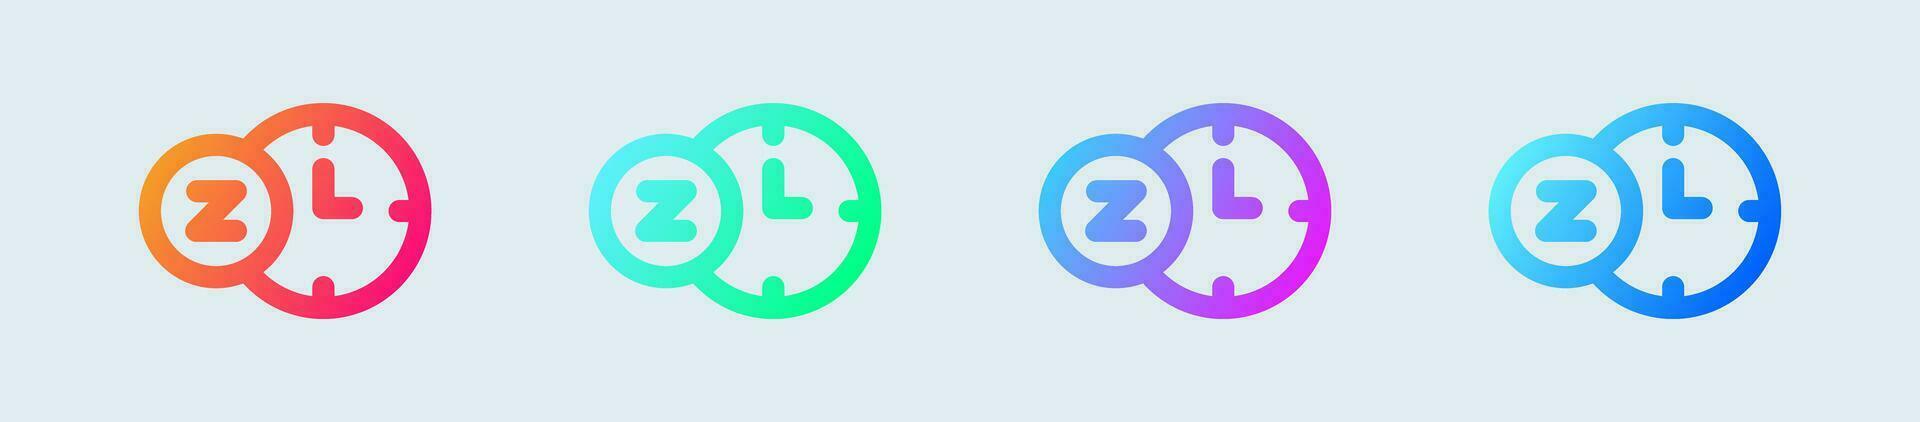 Sleep line icon in gradient colors. Bed time signs vector illustration.